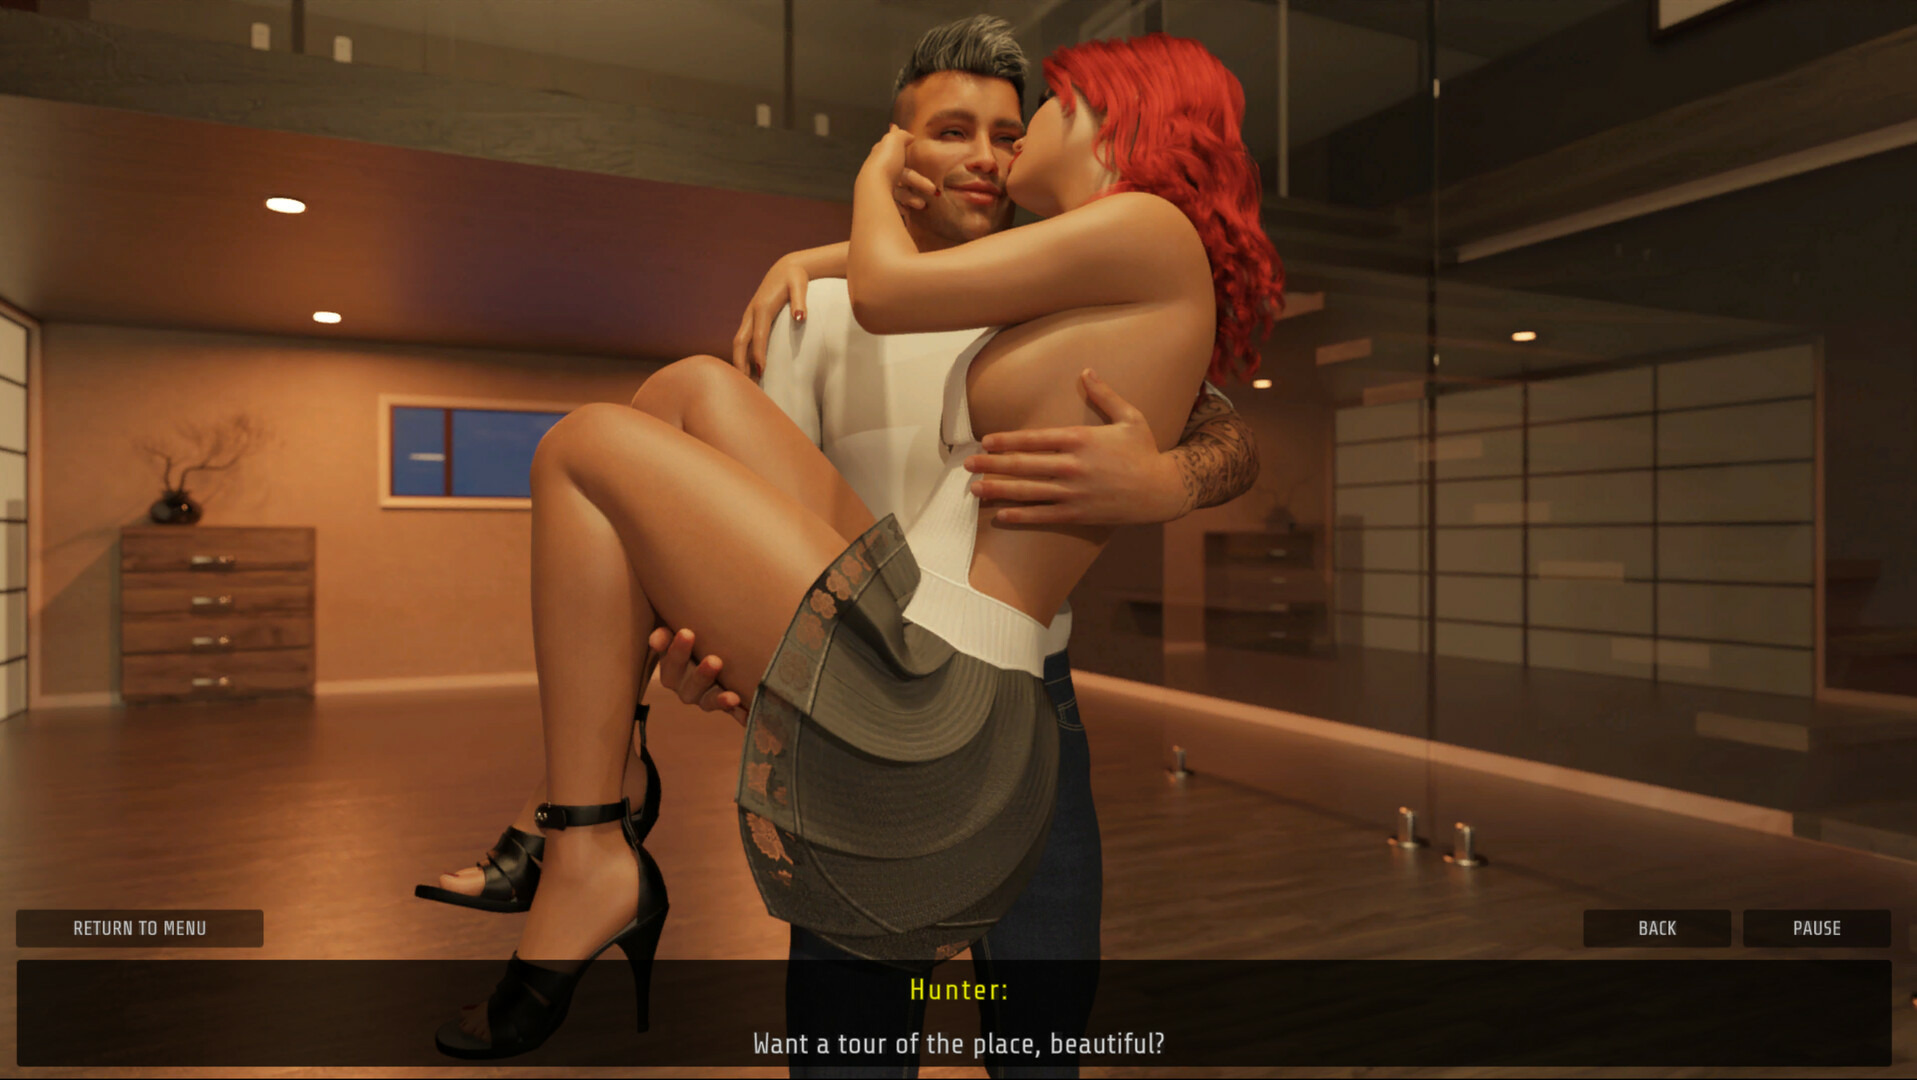 [$ 1.92] Sex Story - Ruby and Hunter - Episode 2 Steam CD Key